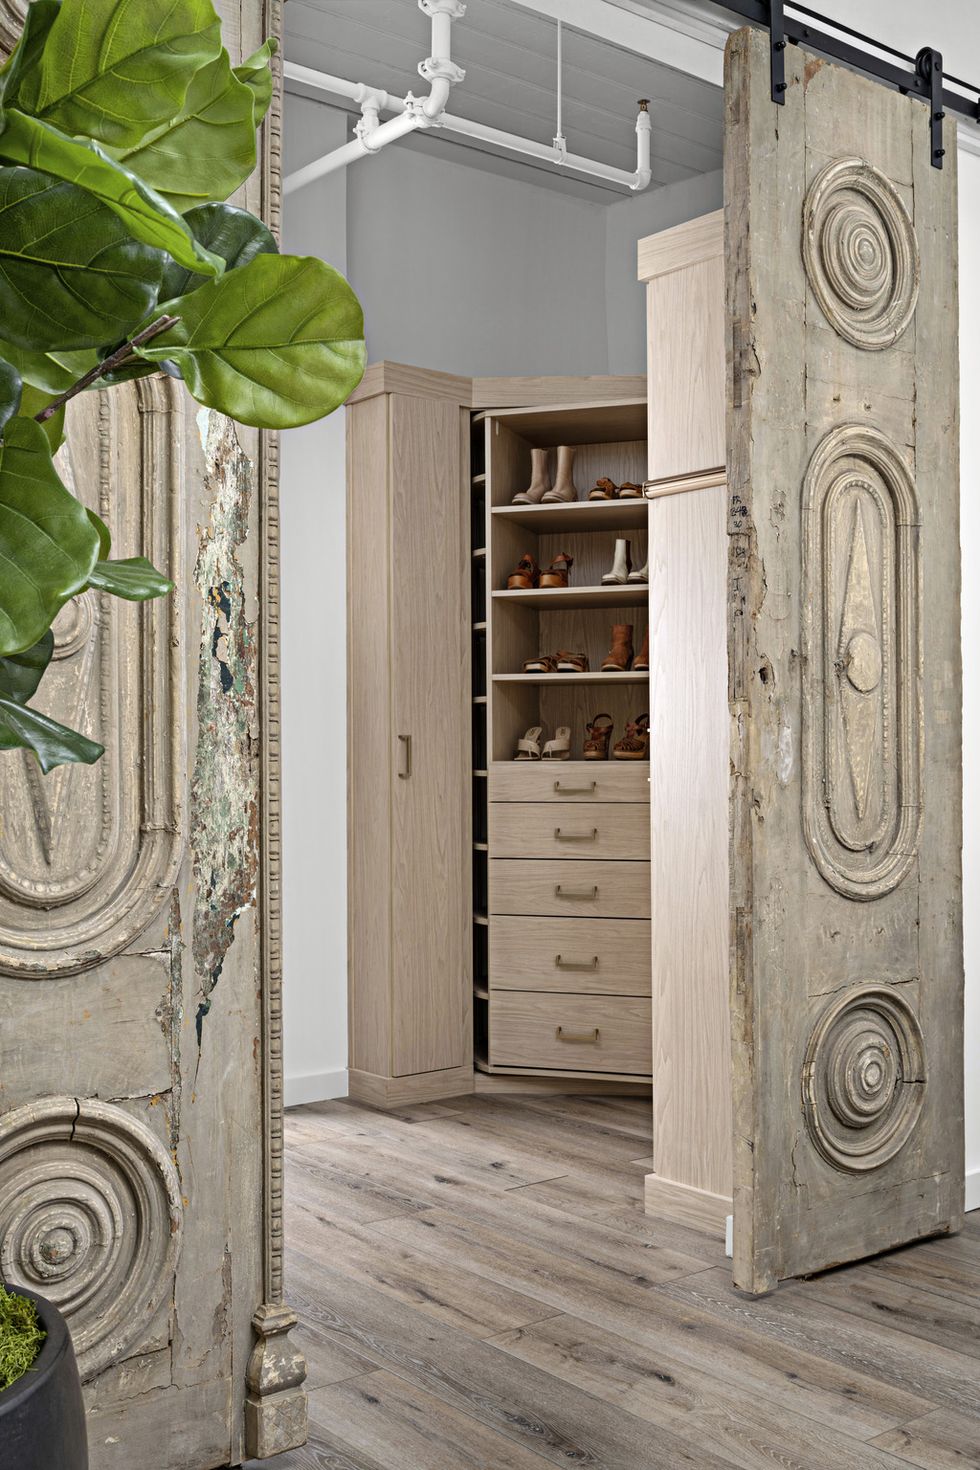 wardrobe
a 360 degree rotating closet system
by closet works features a hidden
full length mirror and ample storage
for shoes sourced from the corbel,
the french doors that close off
the space are from the 1800s